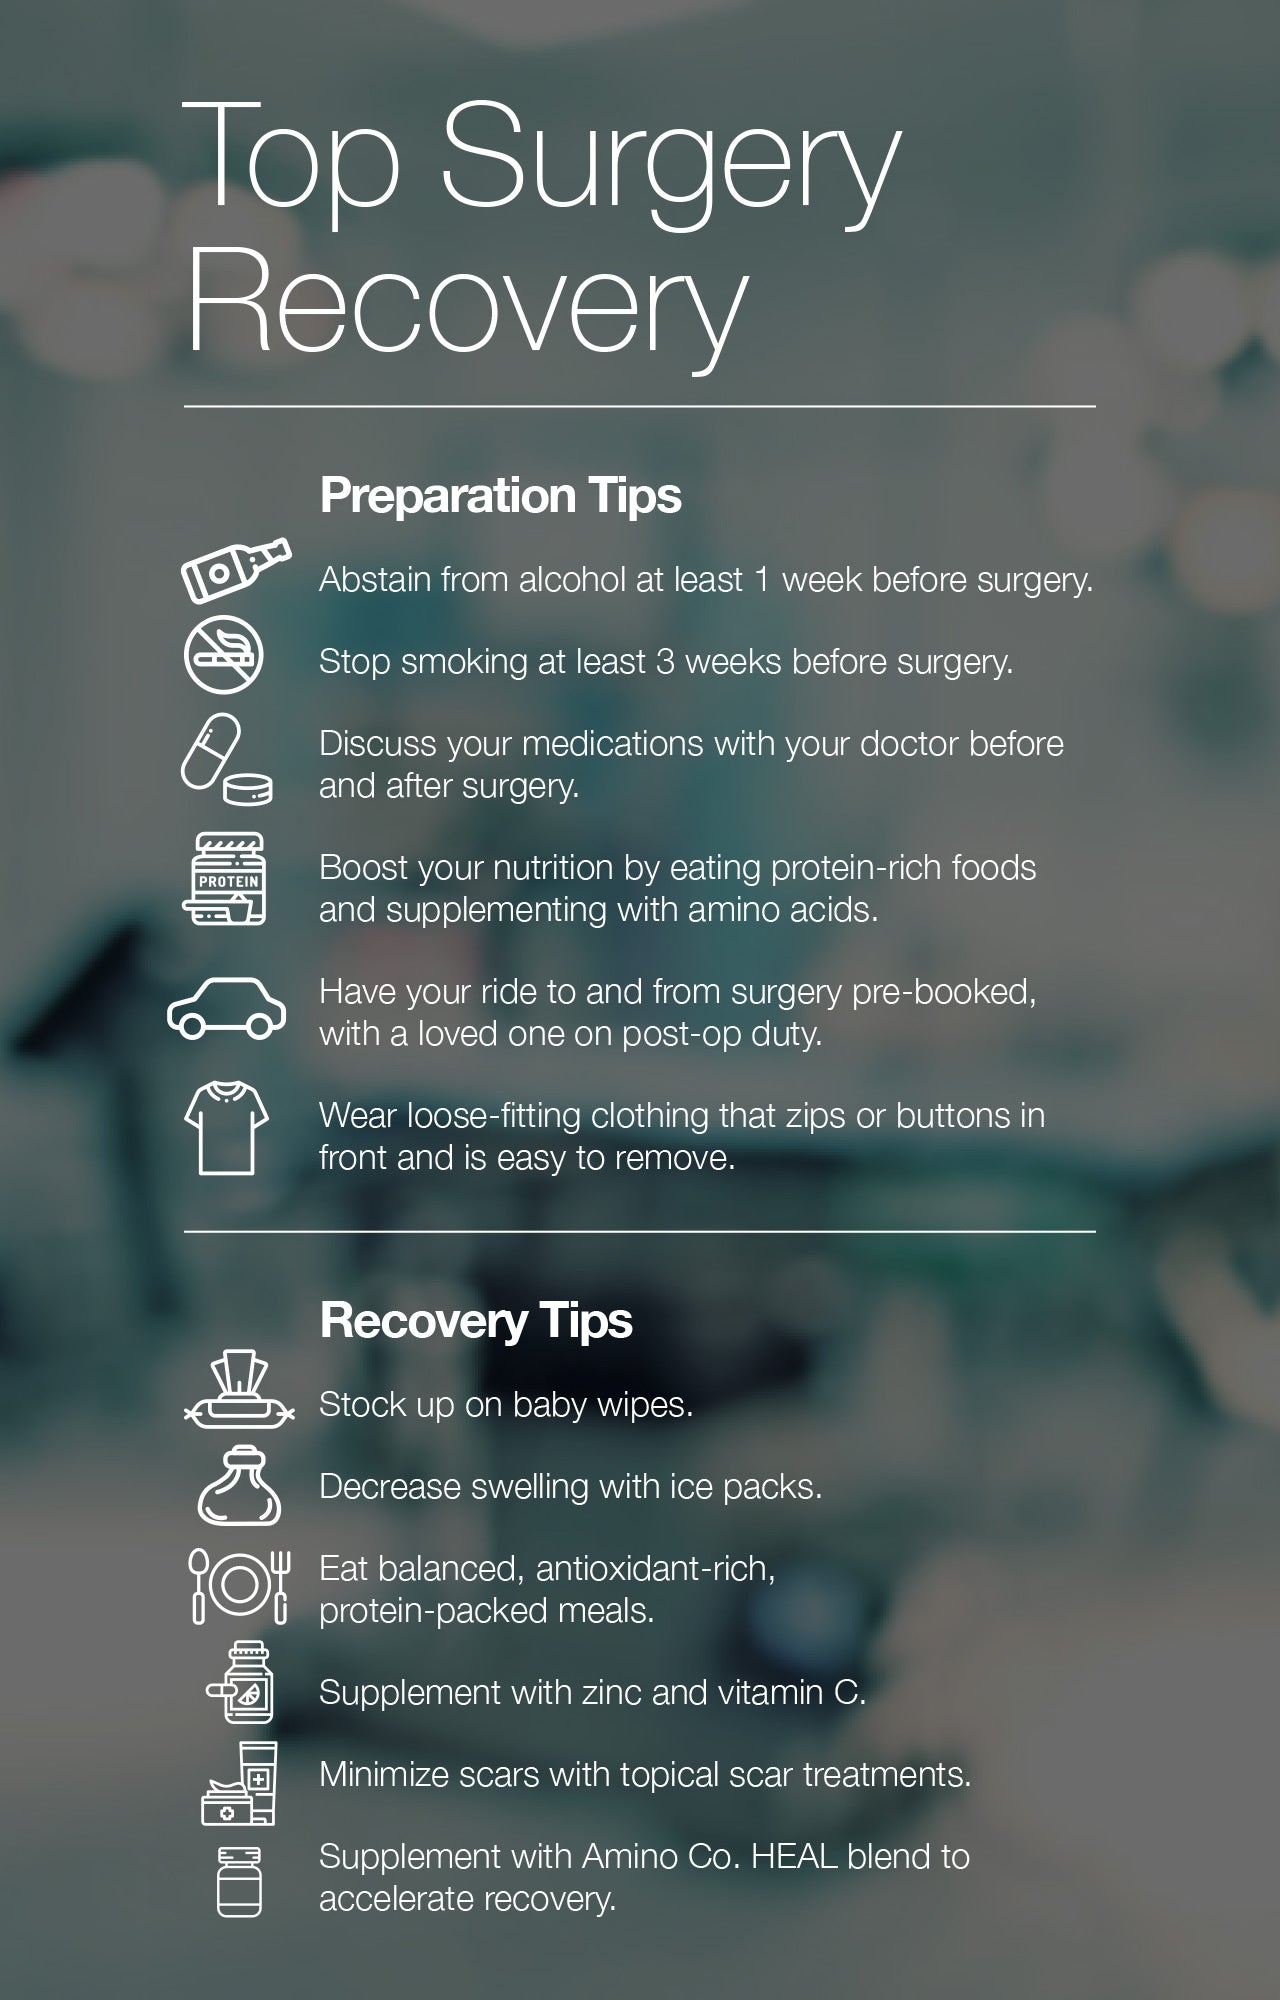 Top surgery recovery and preparation